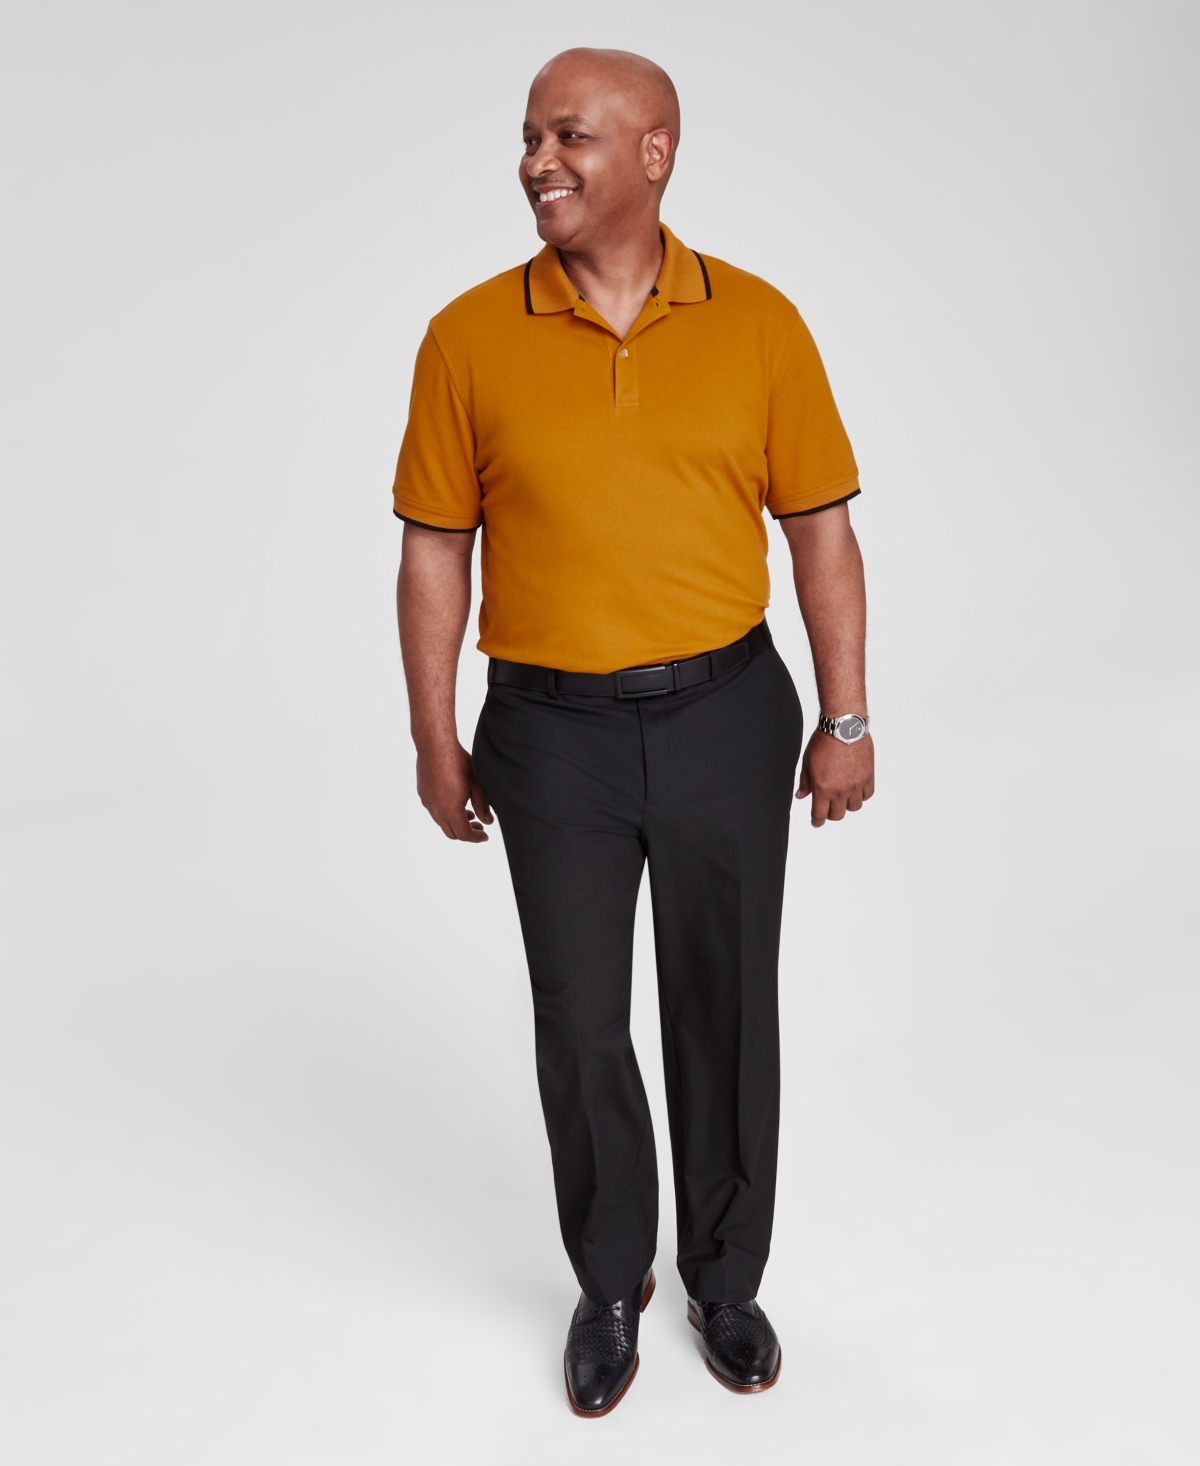 Men's Regular-Fit Tipped Performance Polo Shirt, Created for Macy's - Golden